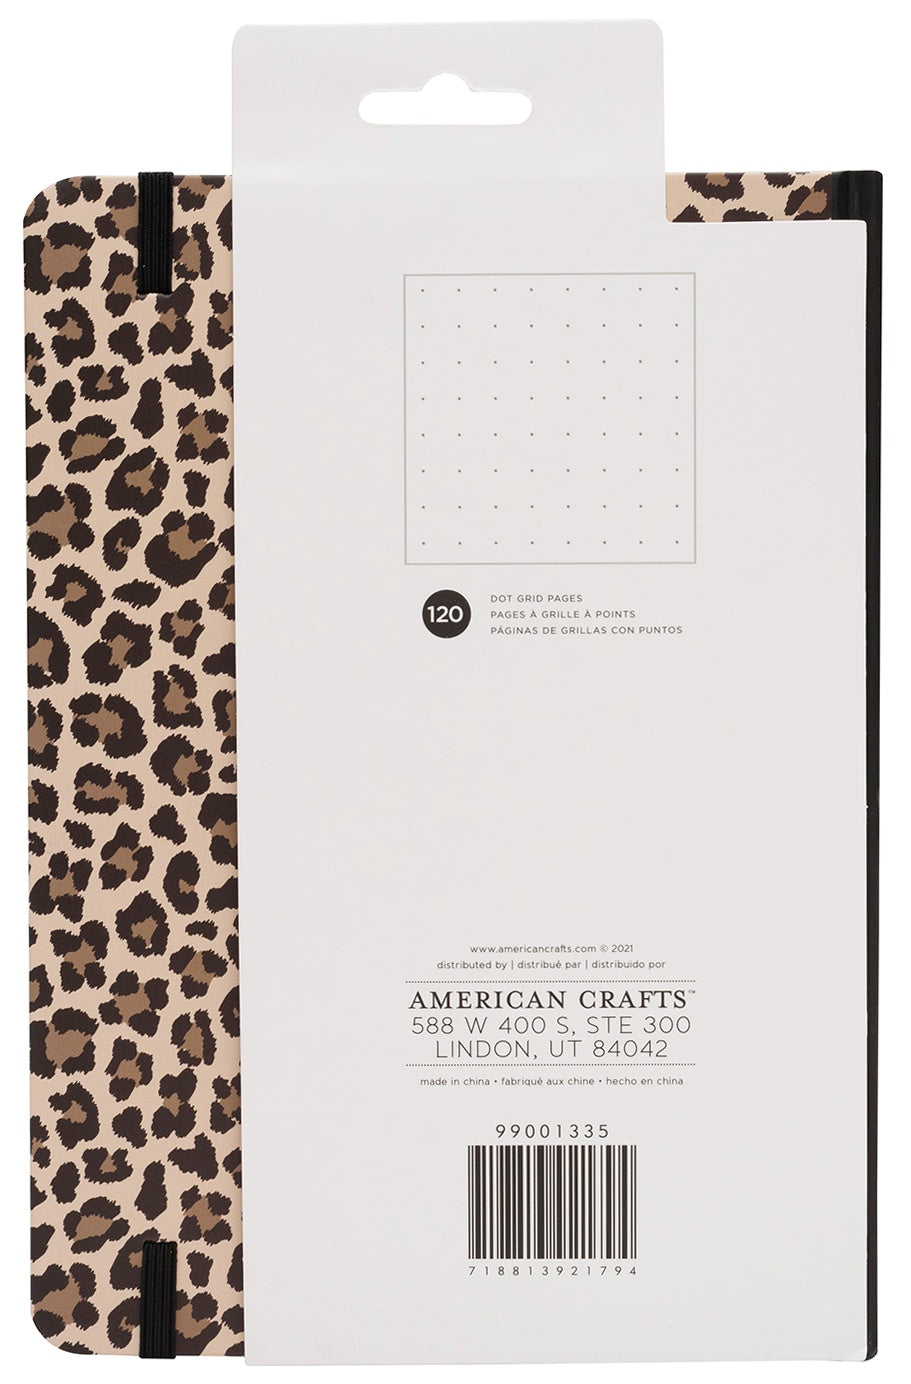 AC Point Planner Perfect Bound Planner 6"X8"-Leopard - Dot Grid - 120 Sheets